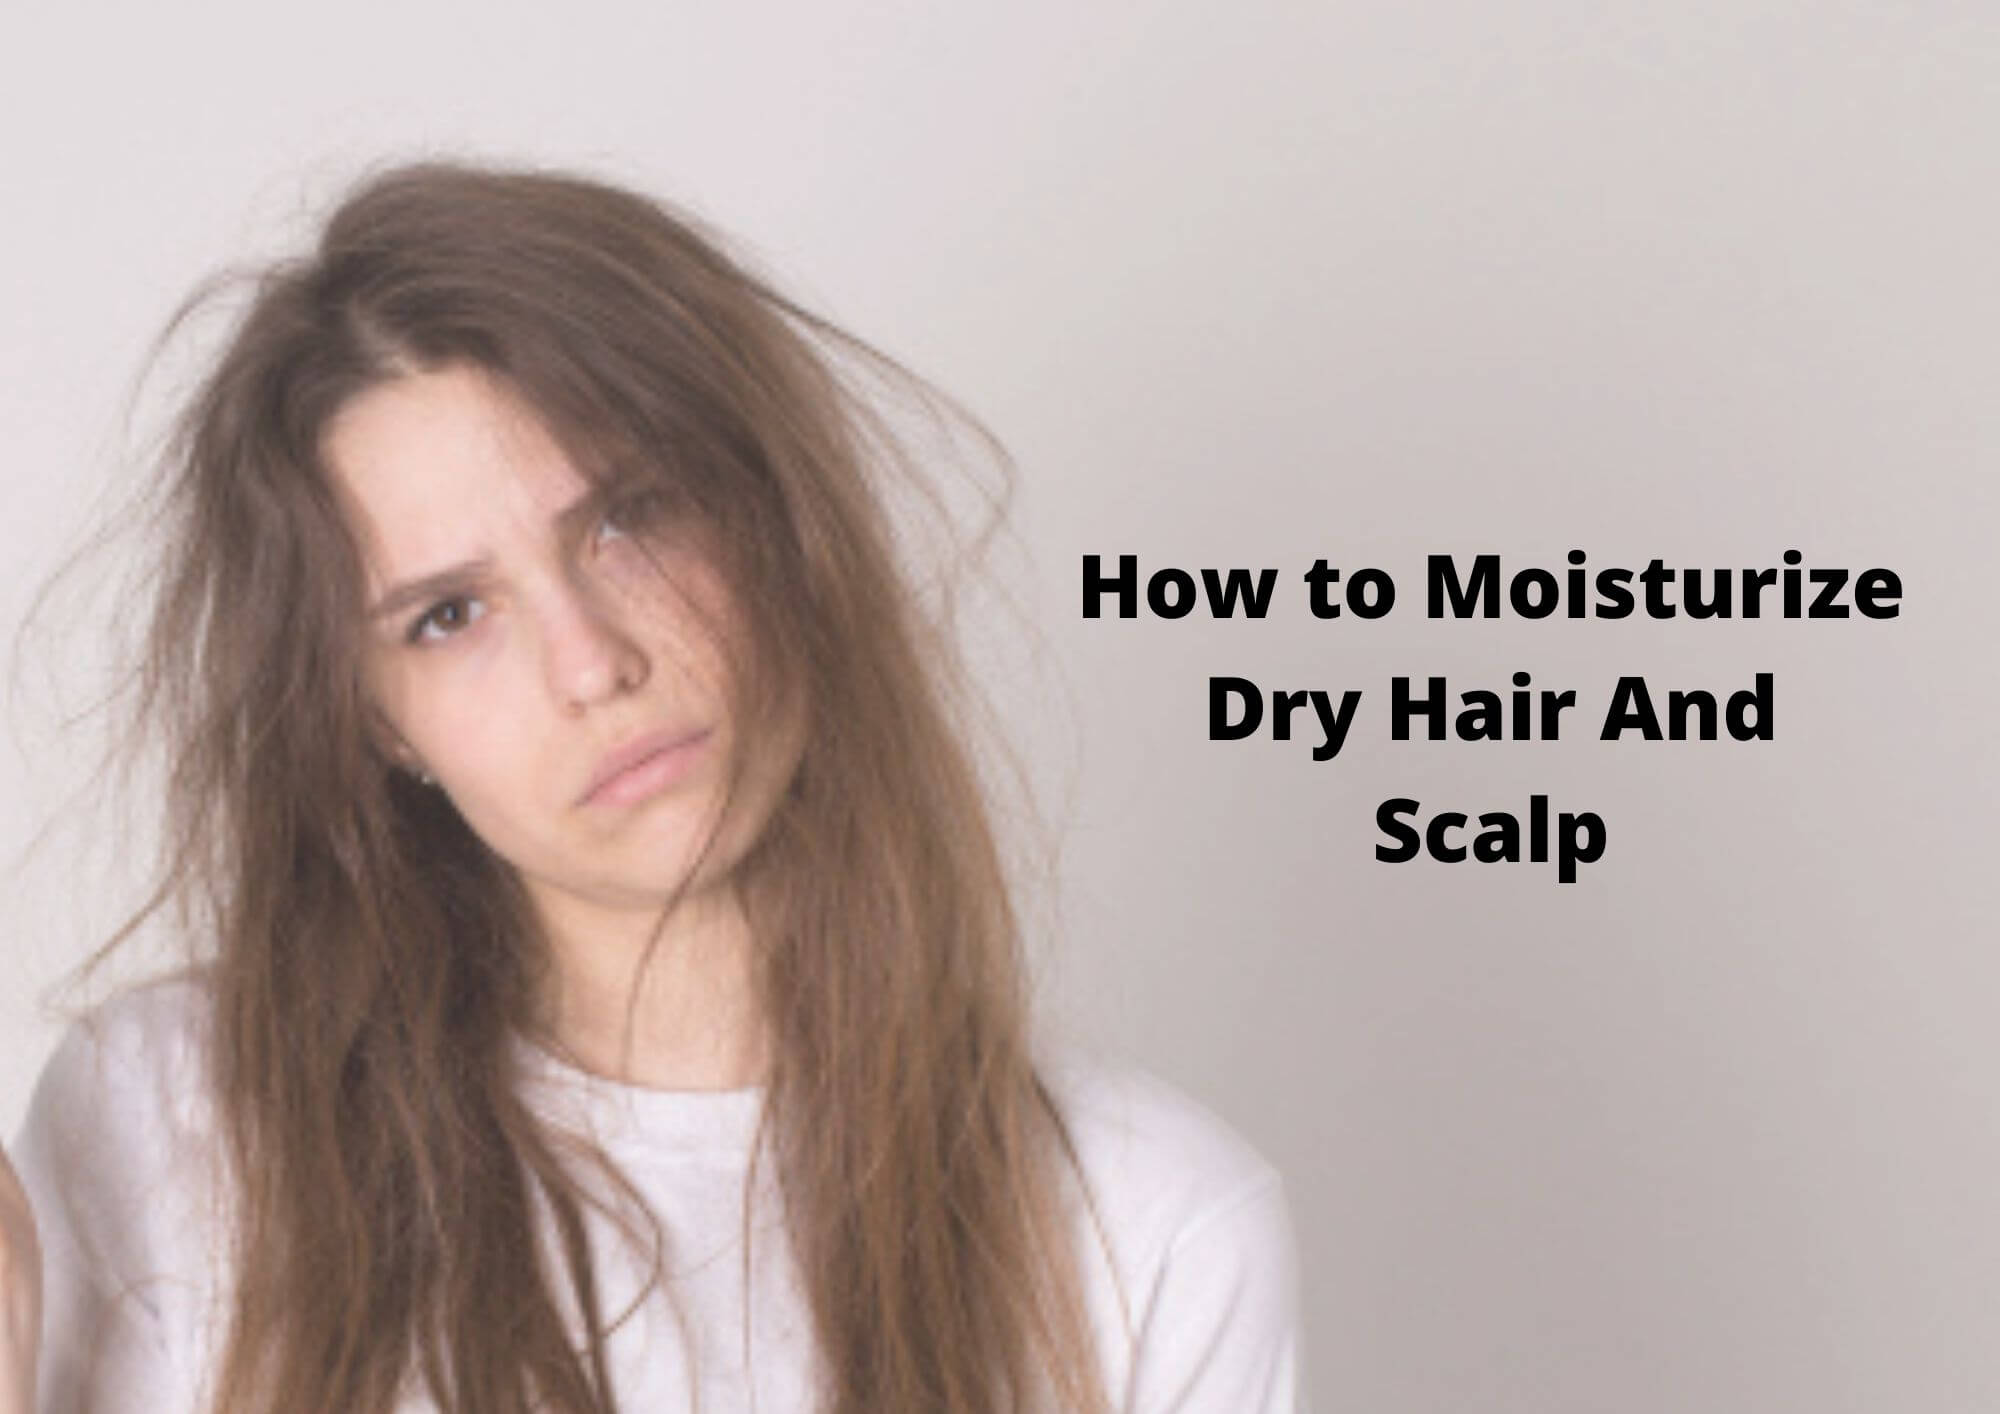 8 Amazing Tips On How To Moisturize Dry Hair And Scalp 2023 - Hair Everyday  Review